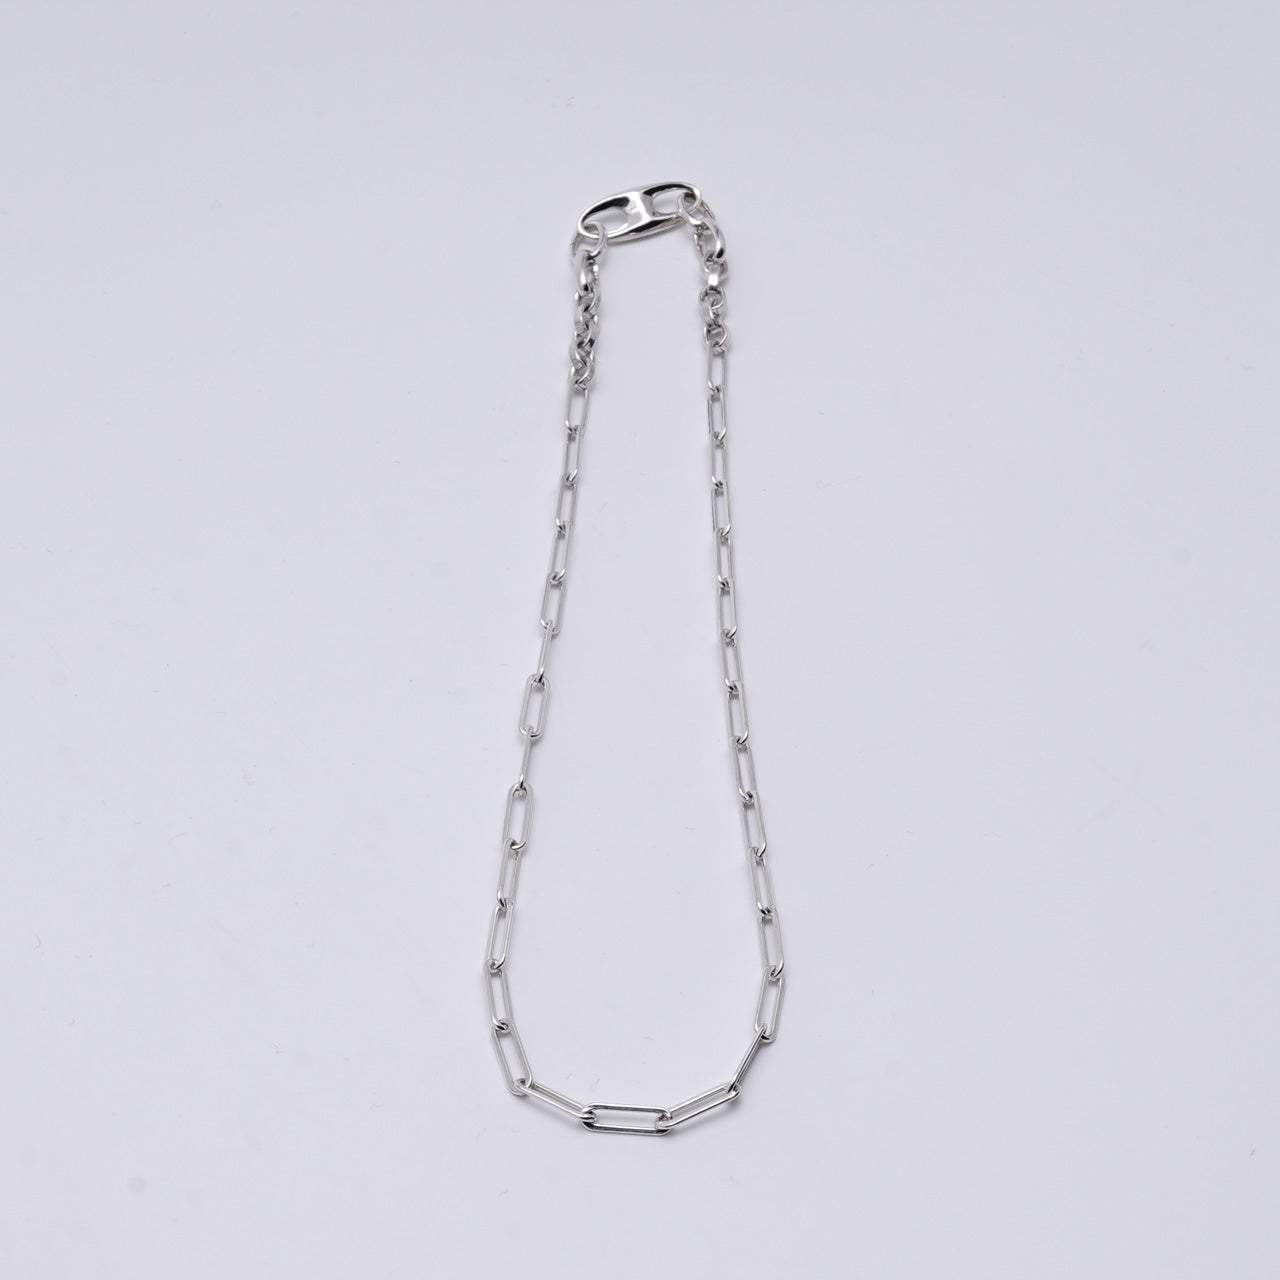 Garden of Eden ガーデンオブエデン チェーン ネックレス アンカー PC CHAIN NECKLACE ANCHOR 40cm 【送料無料】